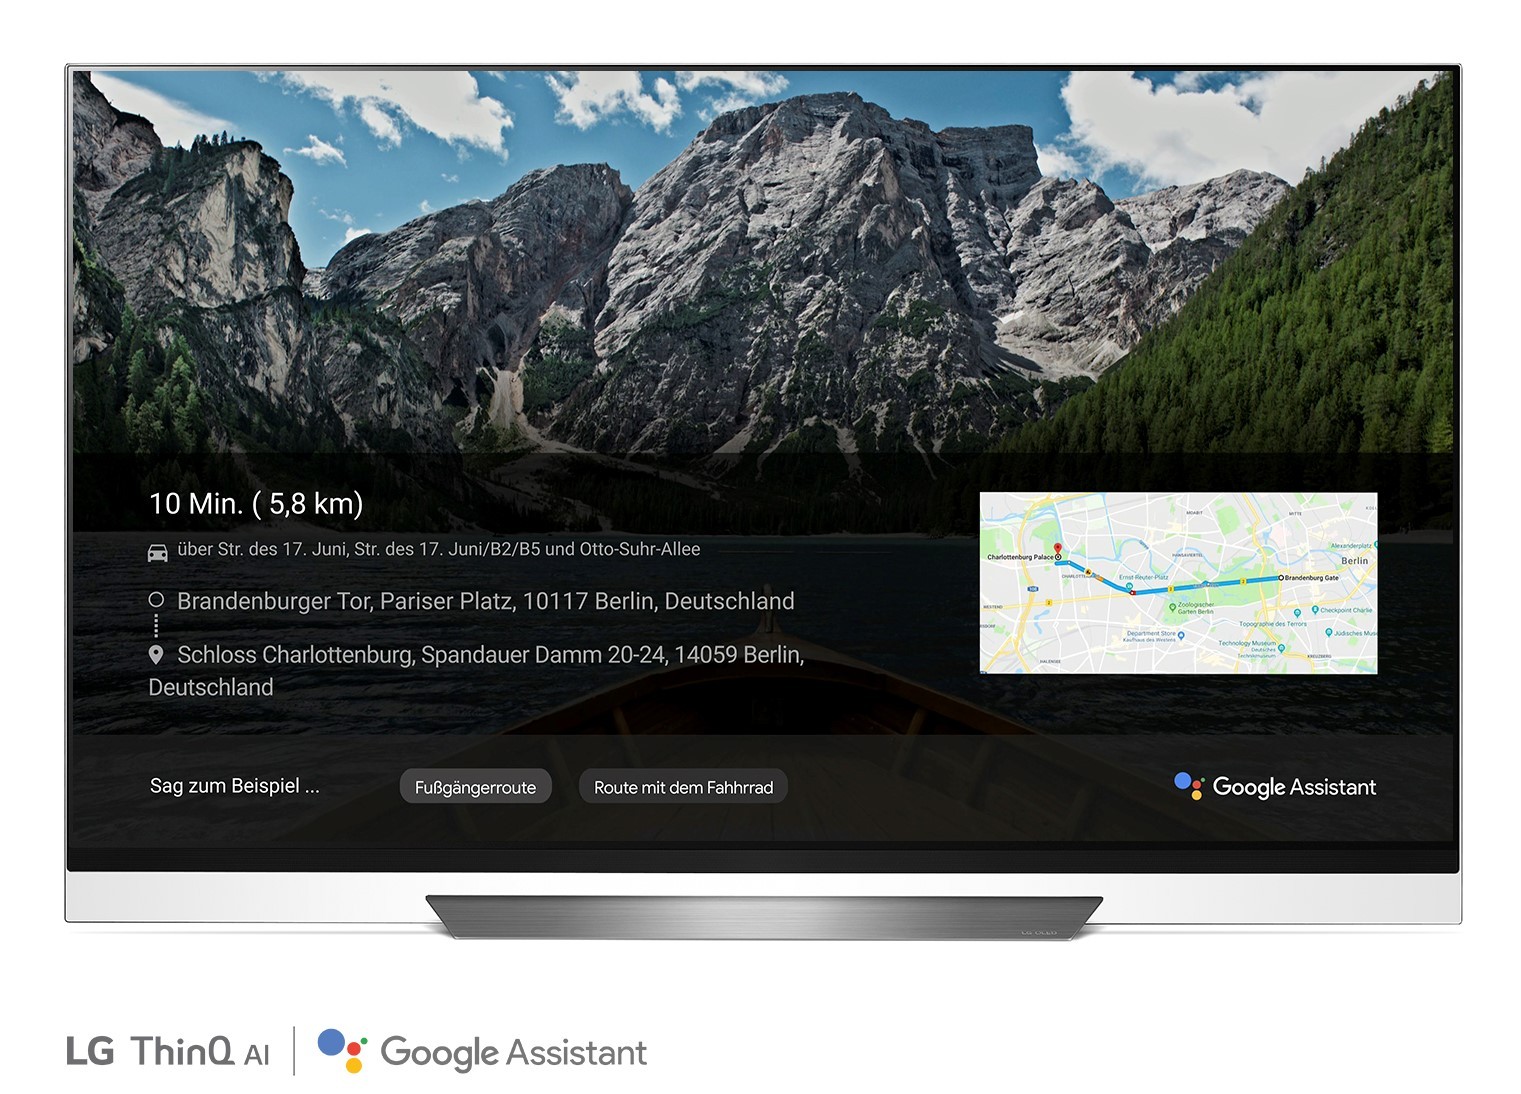 A front view of LG OLED TV showing Google Maps